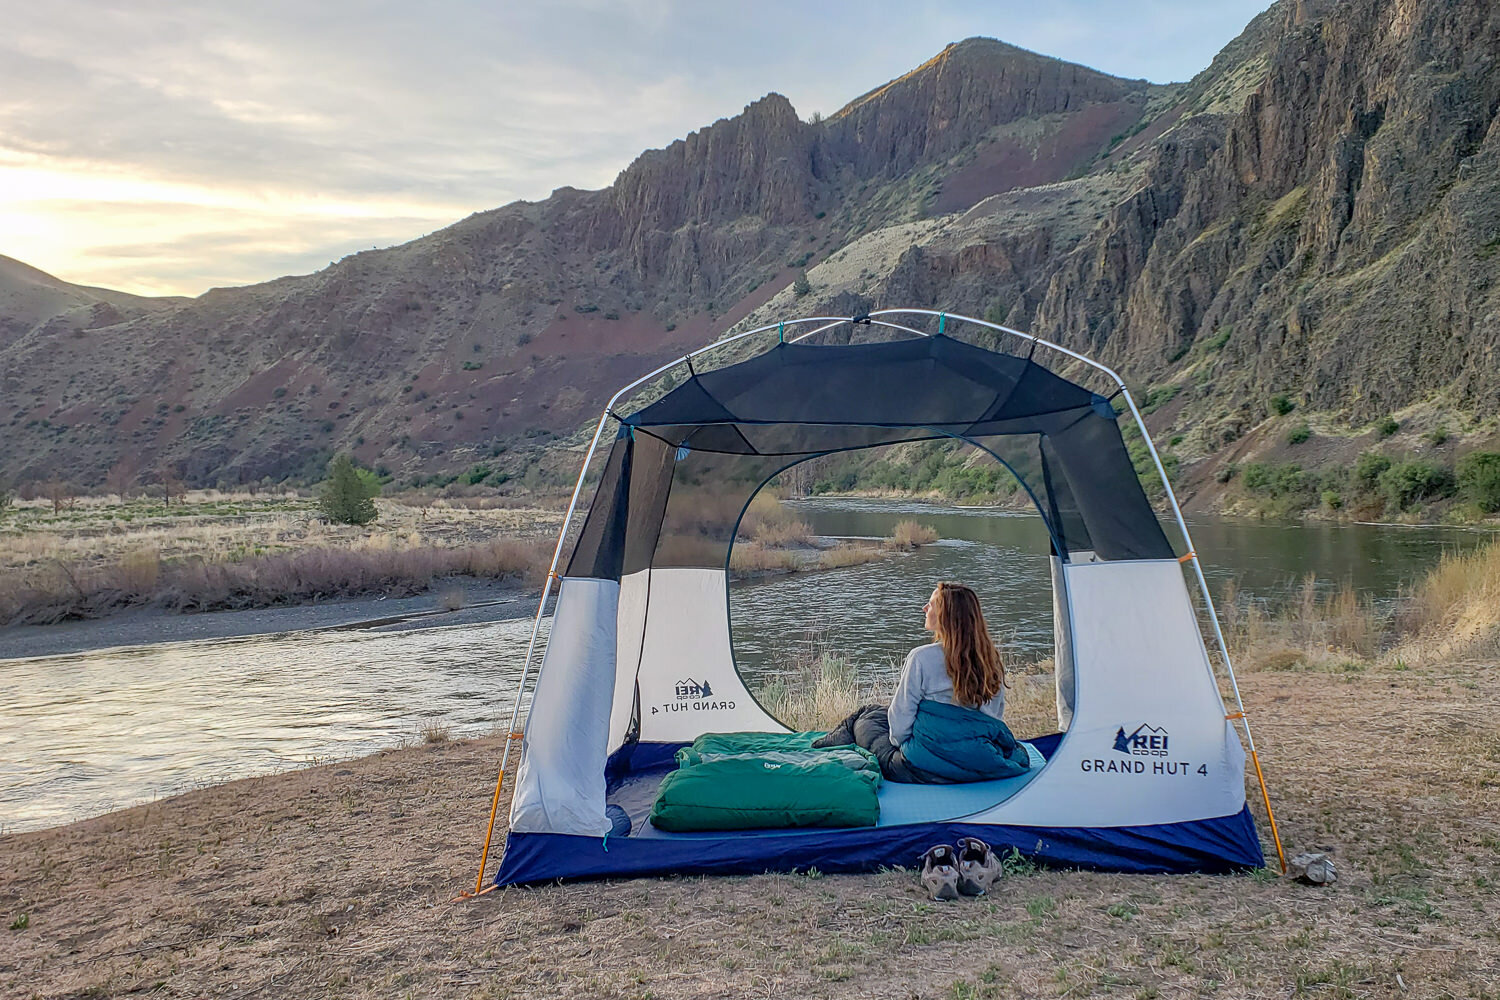 The Best Sleeping Bags for Backpacking and Camping